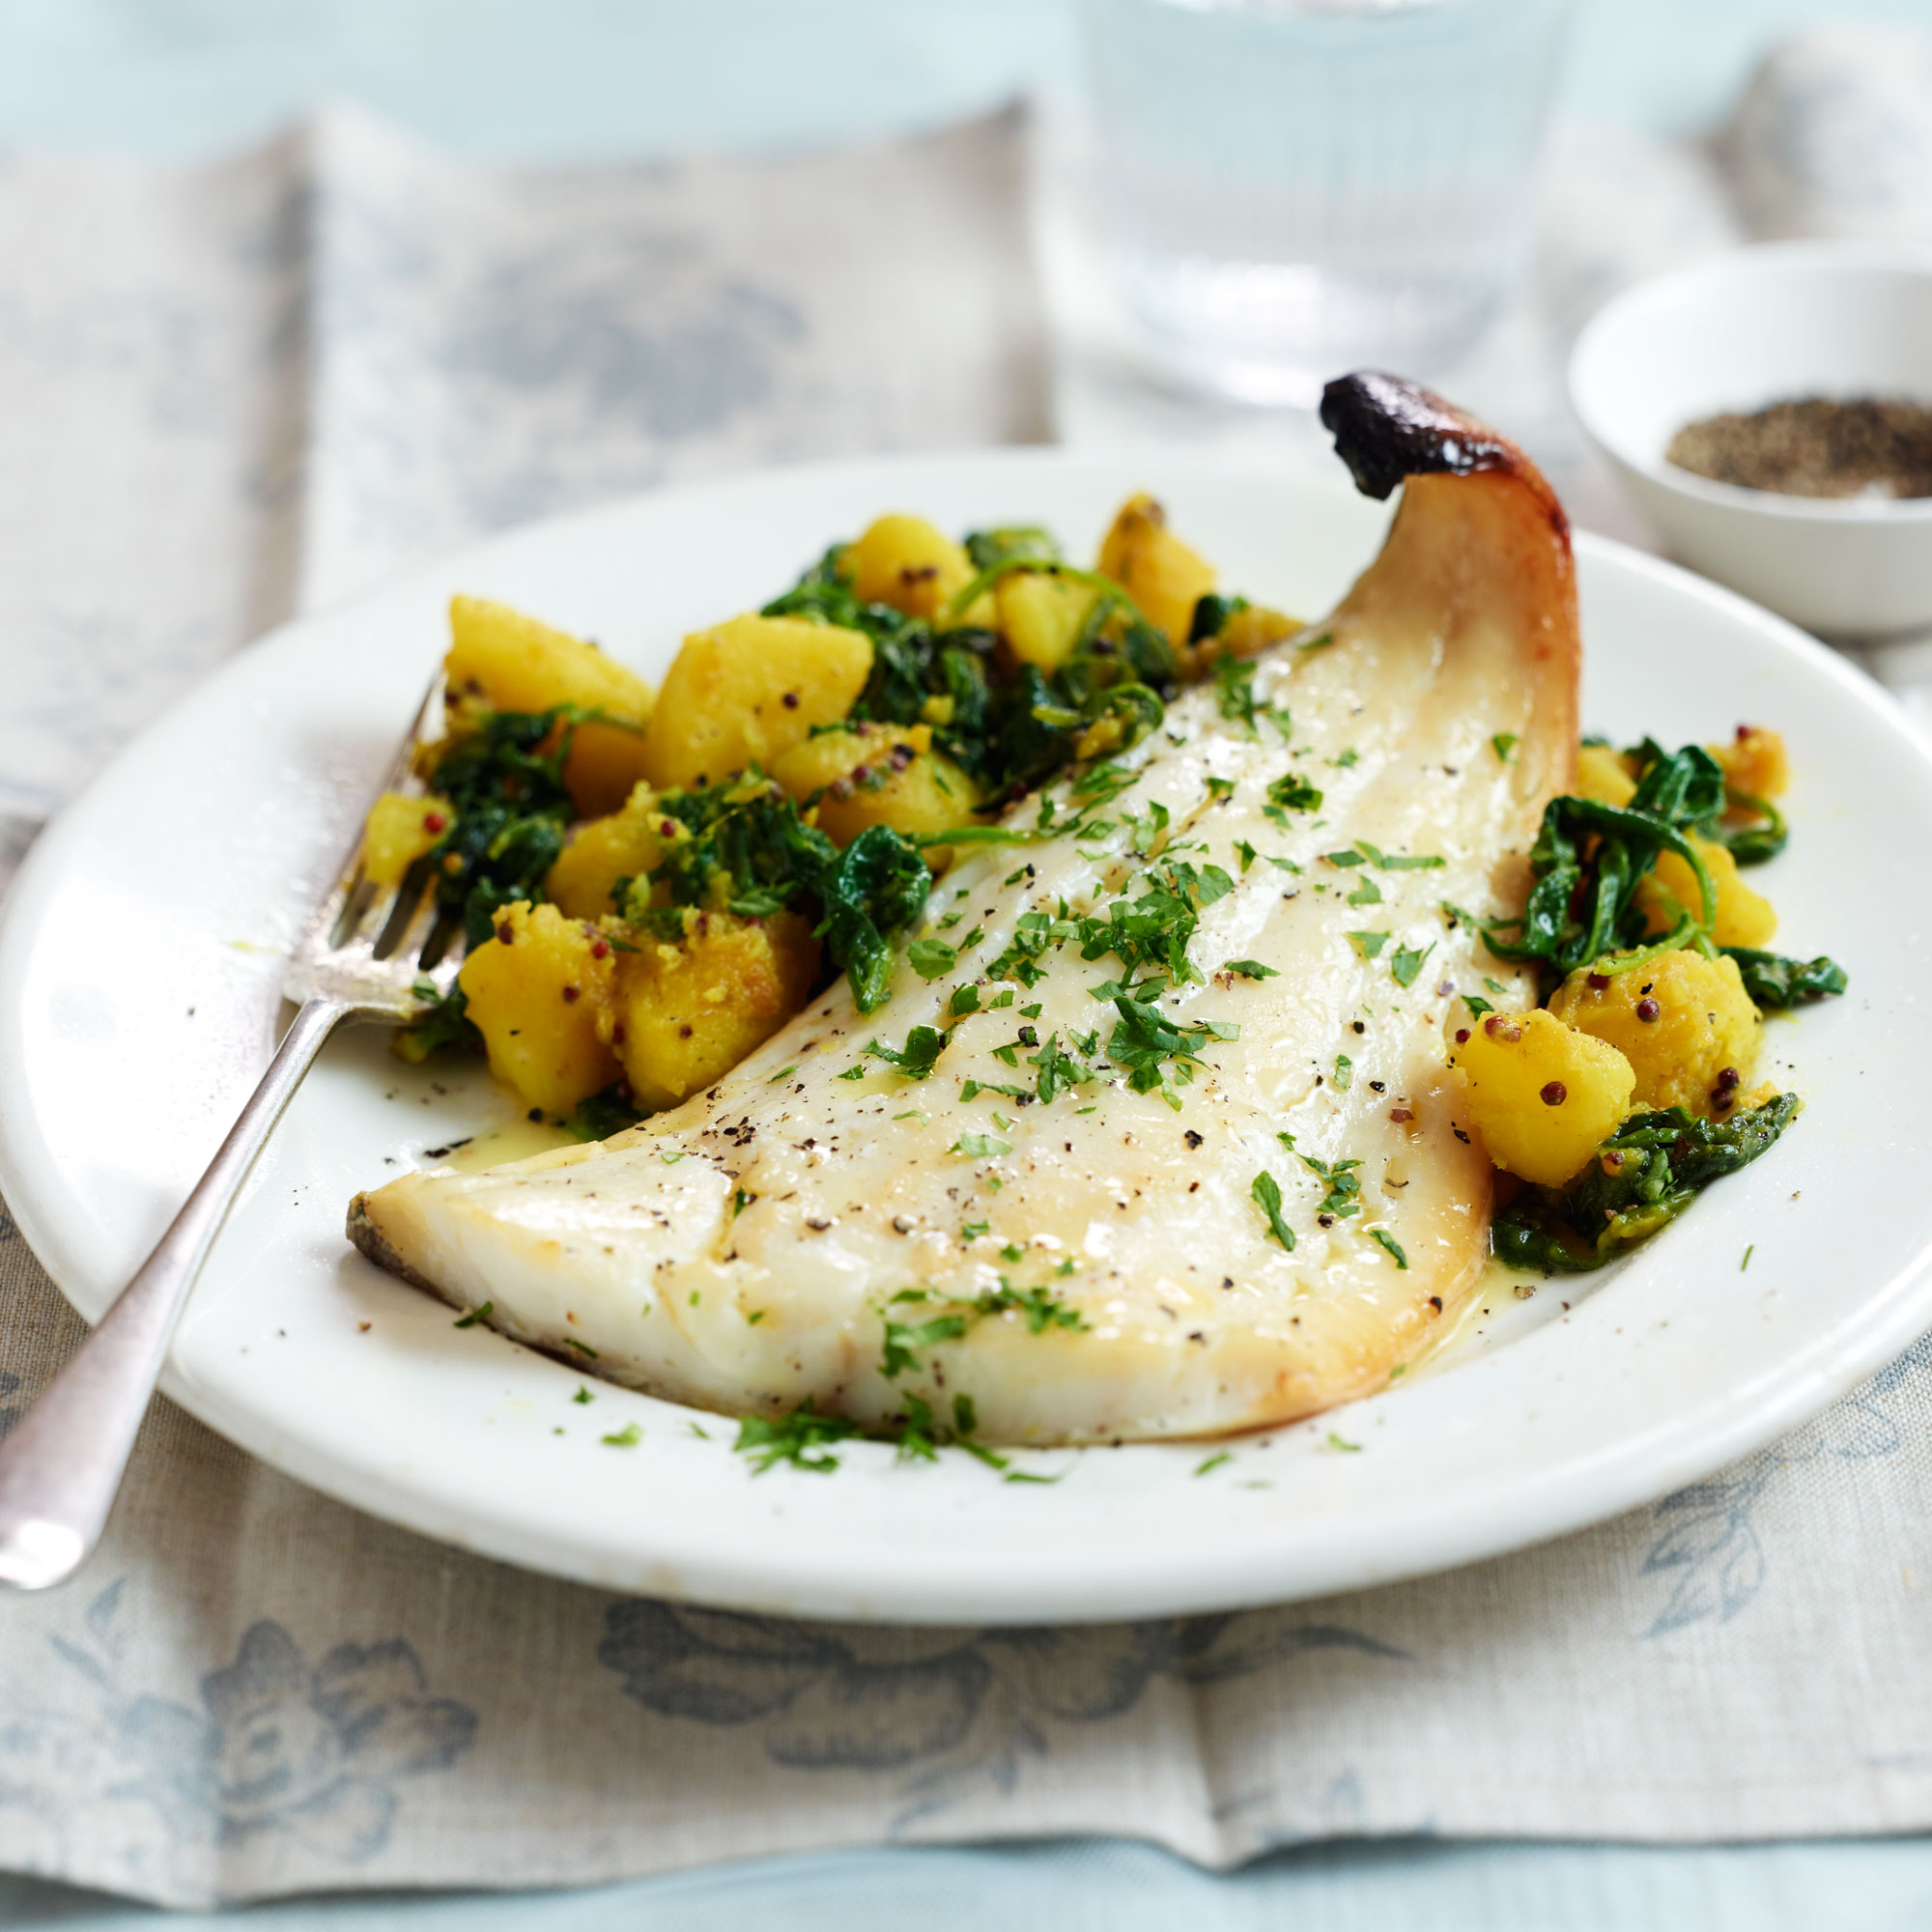 Grilled Smoked Haddock with Spiced Potatoes and Spinach